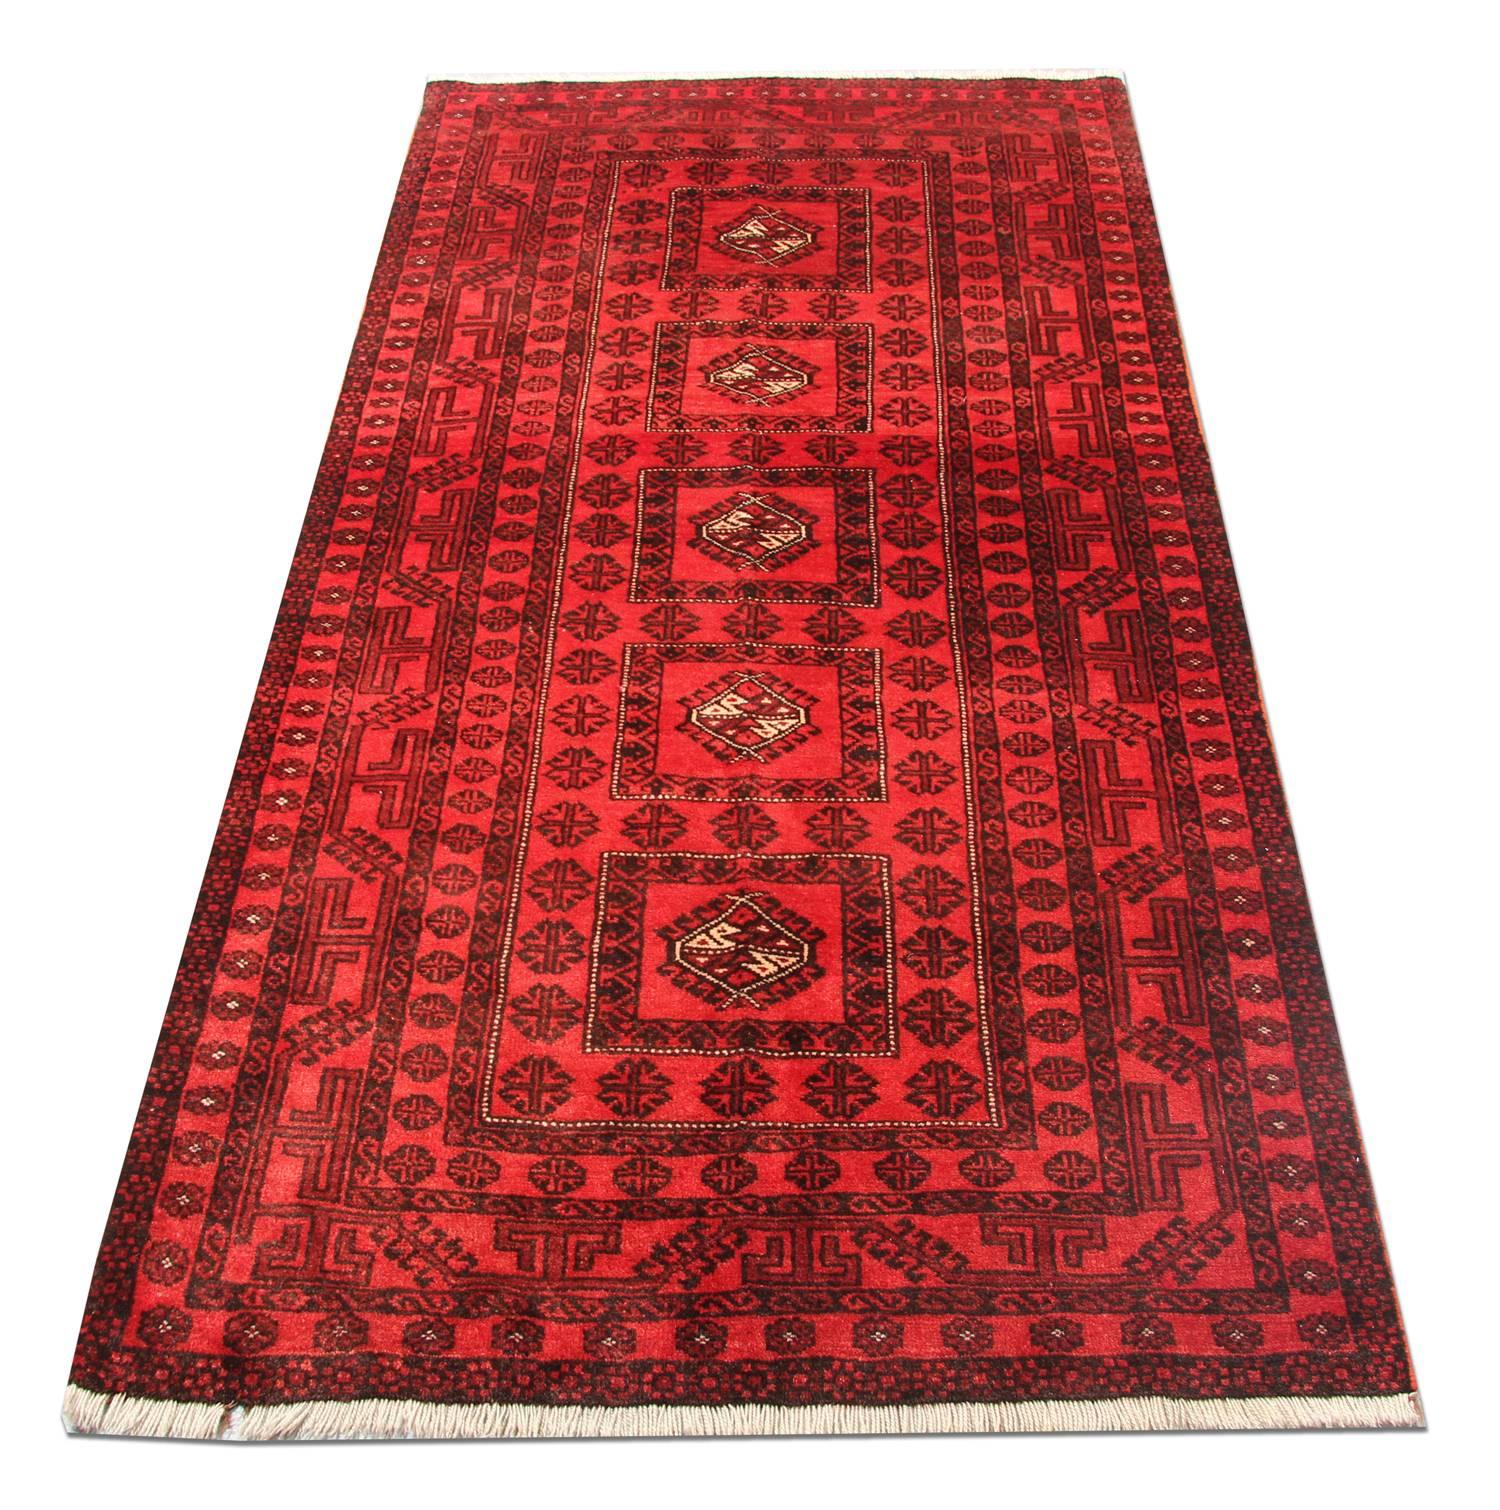 This rich red wool rug was handwoven in Afghanistan with the finest hand-spun wool. The central design features a repeat pattern medallion design with a decorative surround and border woven in broad blue accents that contrast elegantly with the